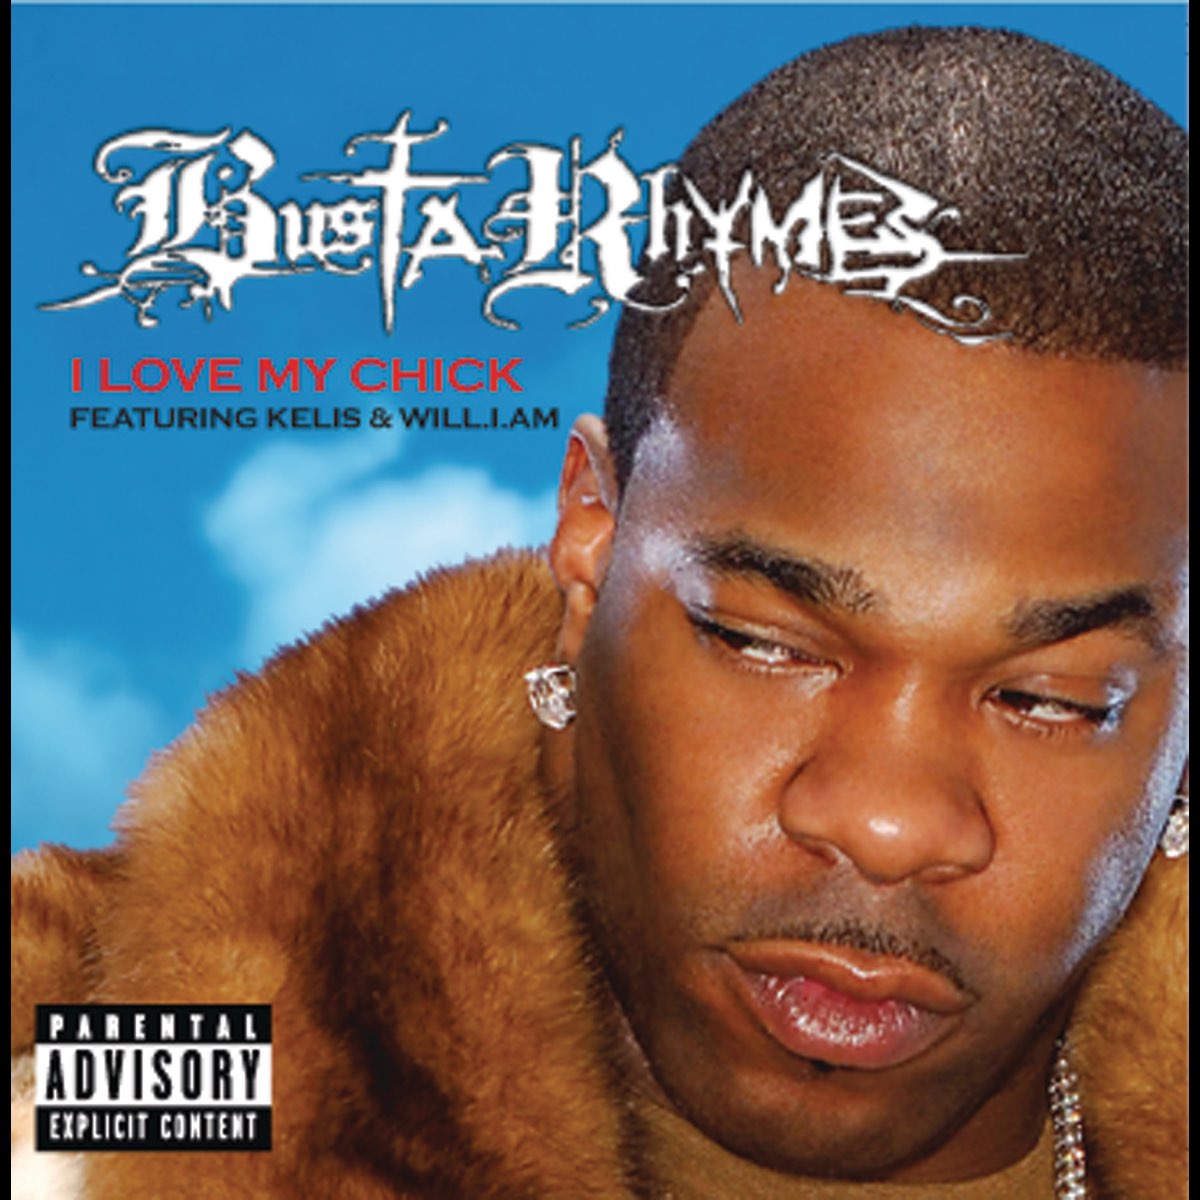 Busta Rhymes ft. featuring will.i.am & Kelis I Love My Bitch cover artwork